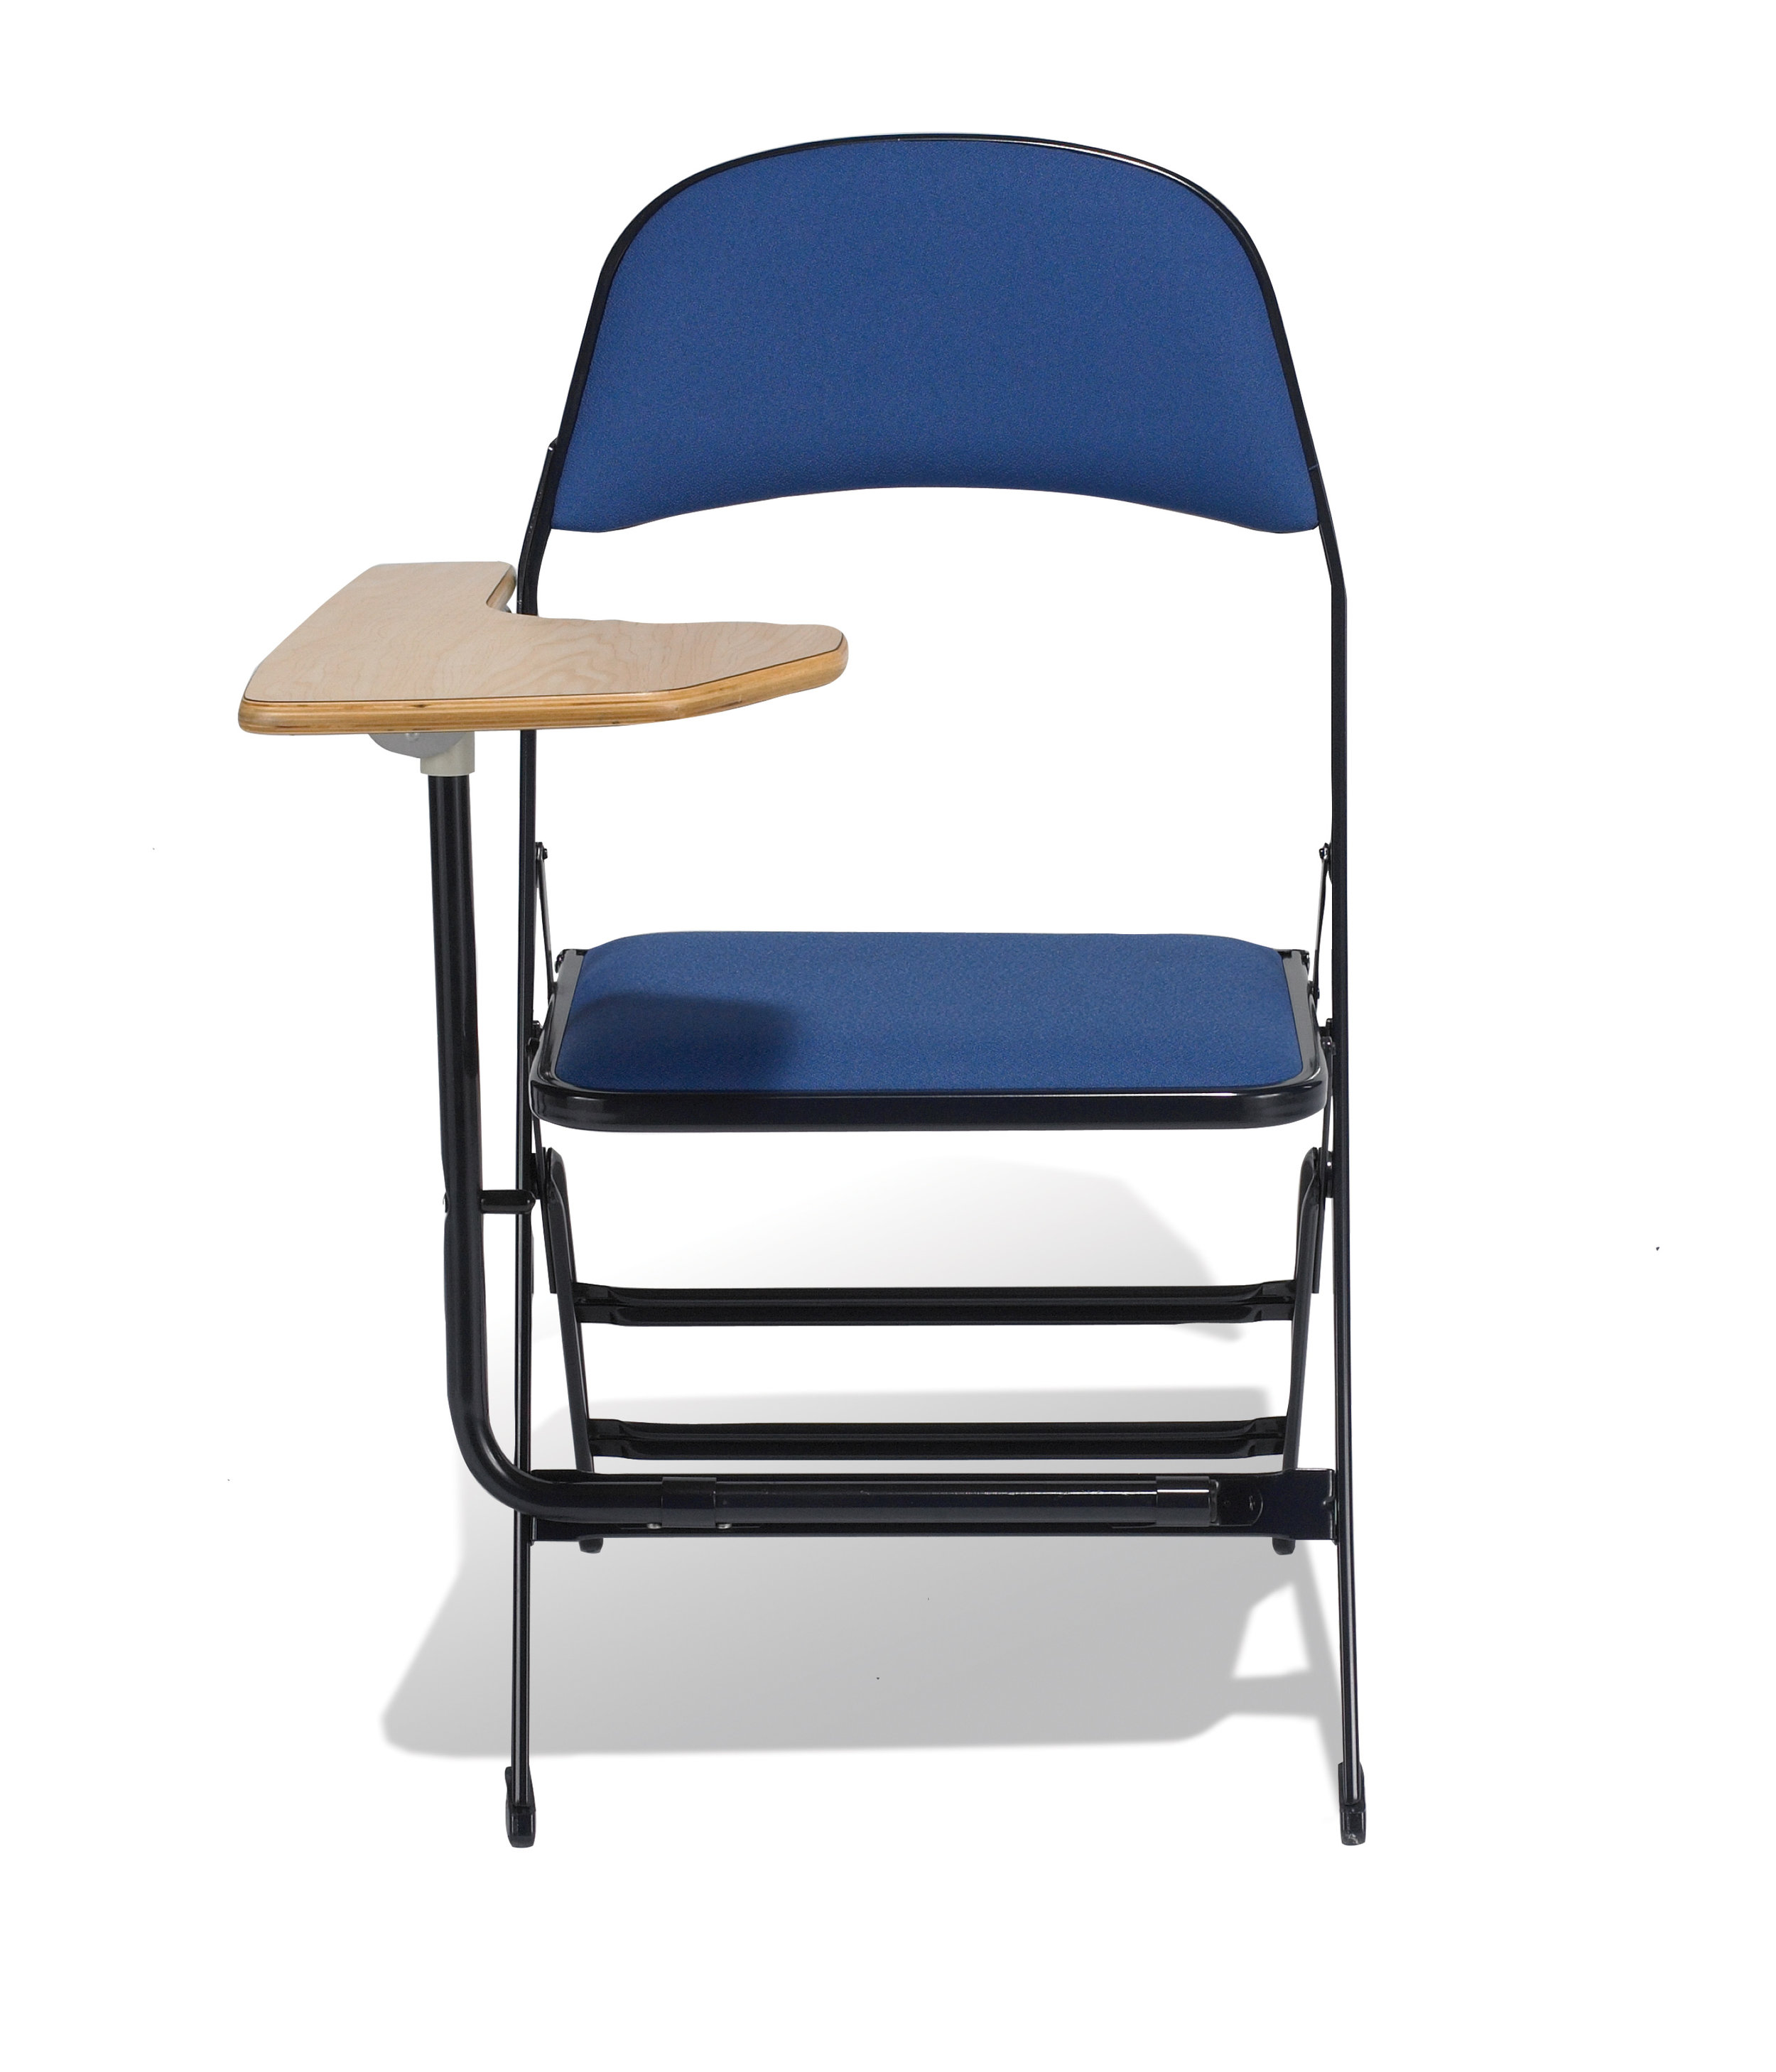 VIP — Folding portable chairs for any venue – Clarin Seating